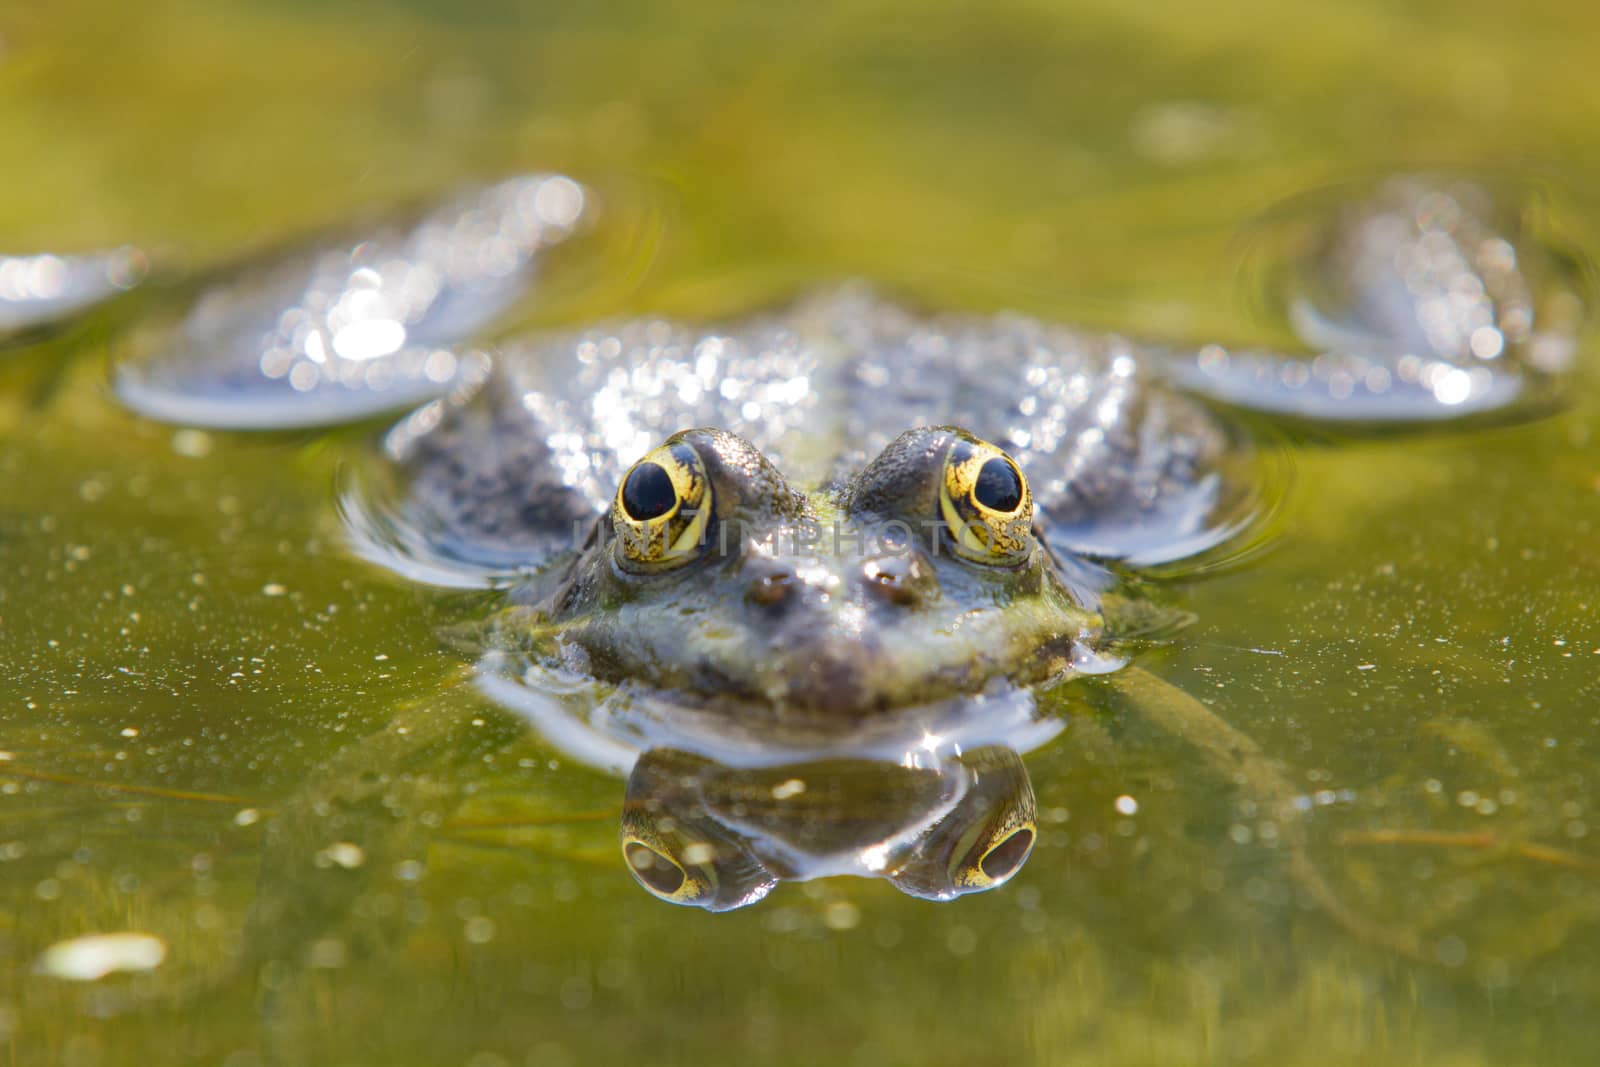 Detailed frog in pond with legs and shiny eyes